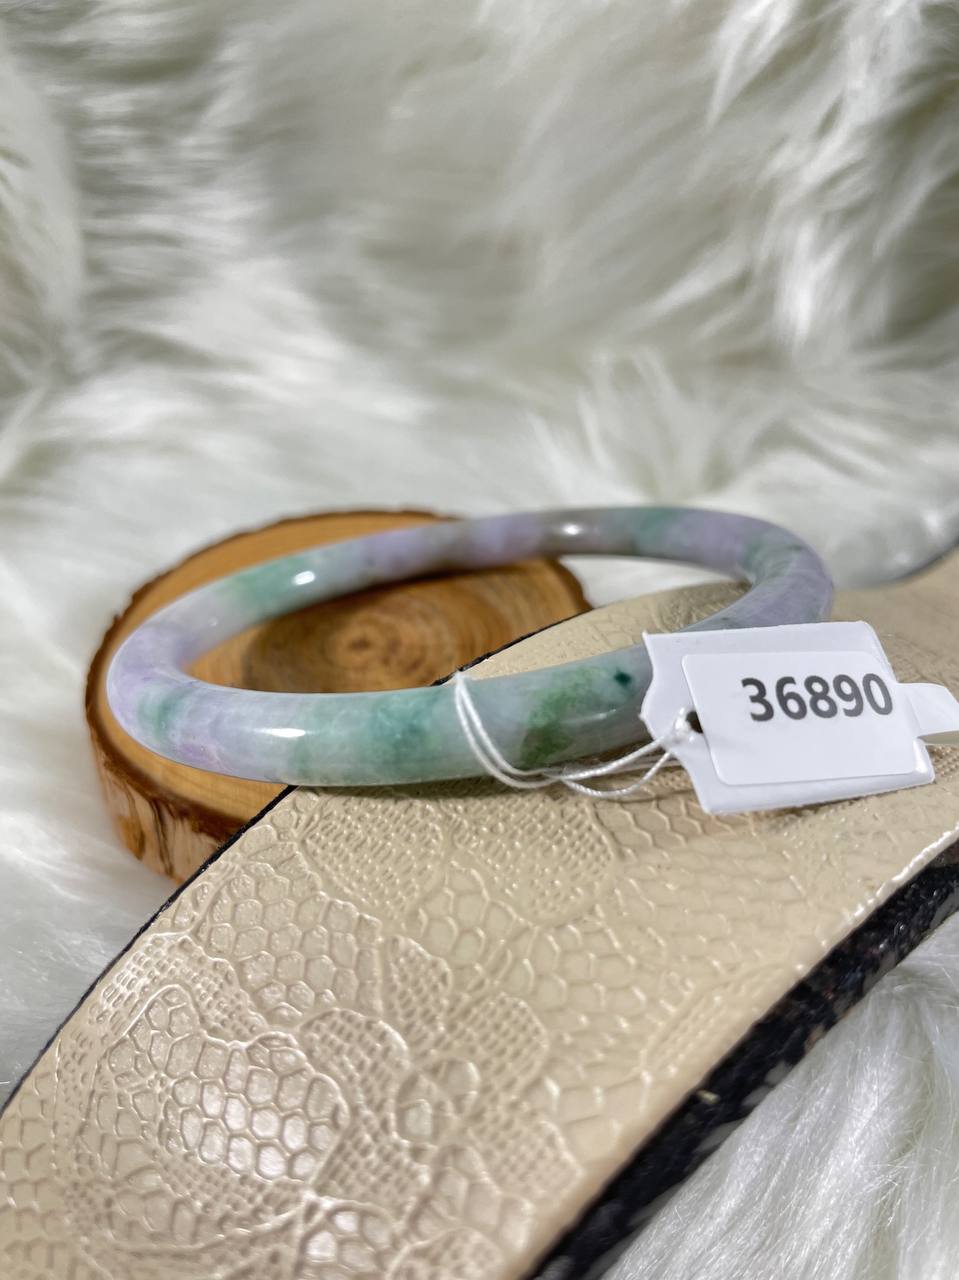 Grade A Natural Jade Bangle with certificate #36890